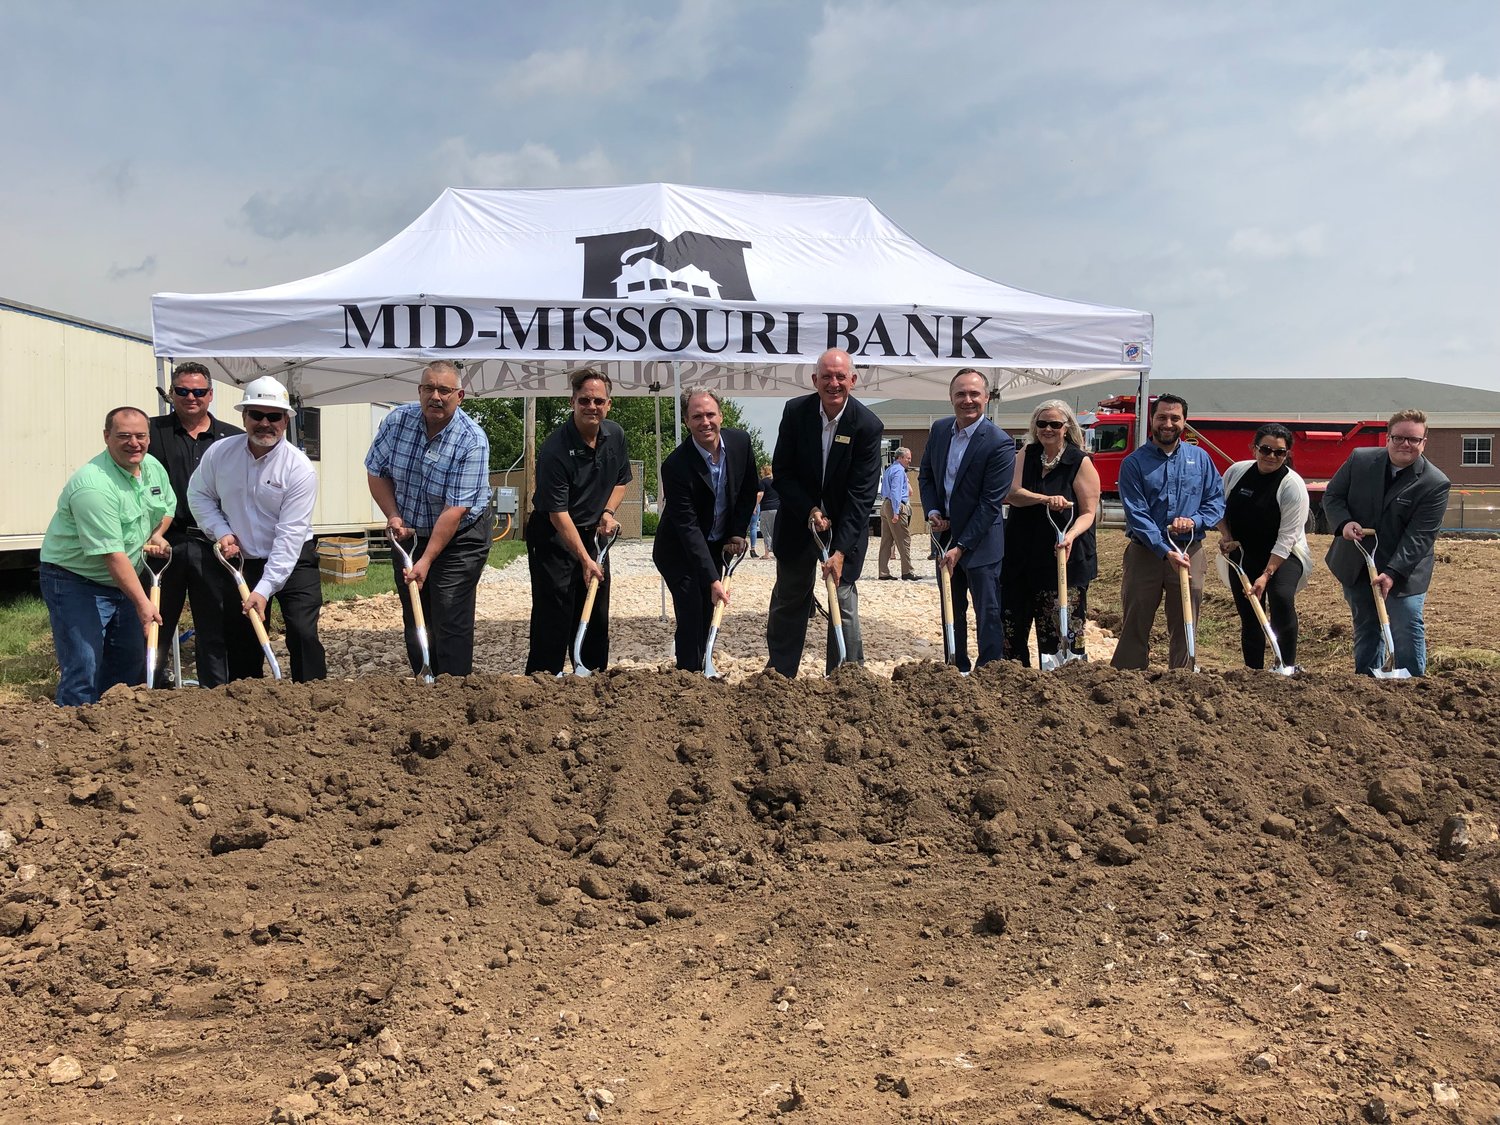 The start of construction is underway for Mid-Missouri Bank’s new headquarters following this morning’s groundbreaking ceremony.